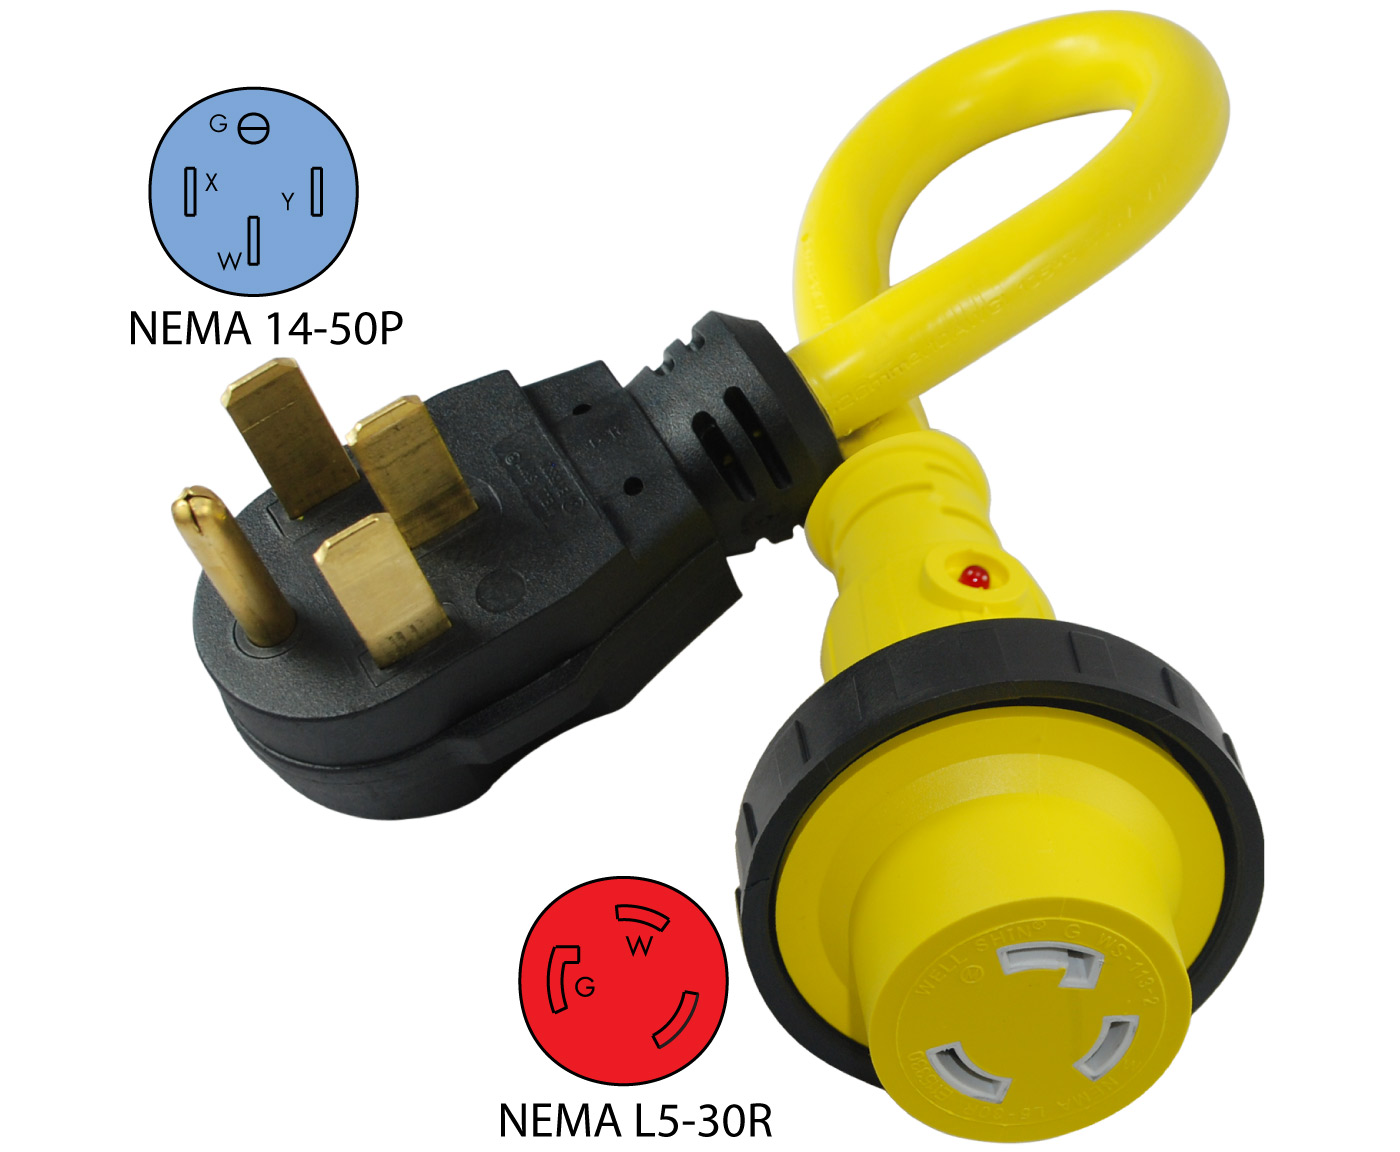 Plugrand 50 Amp Male NEMA 14-50P to 30 Amp Female NEMA L5-30R Locking Adapter，RV 50A Adapter 14-50P Male to Shore Power 30A L5-30R Female with Locking Ring